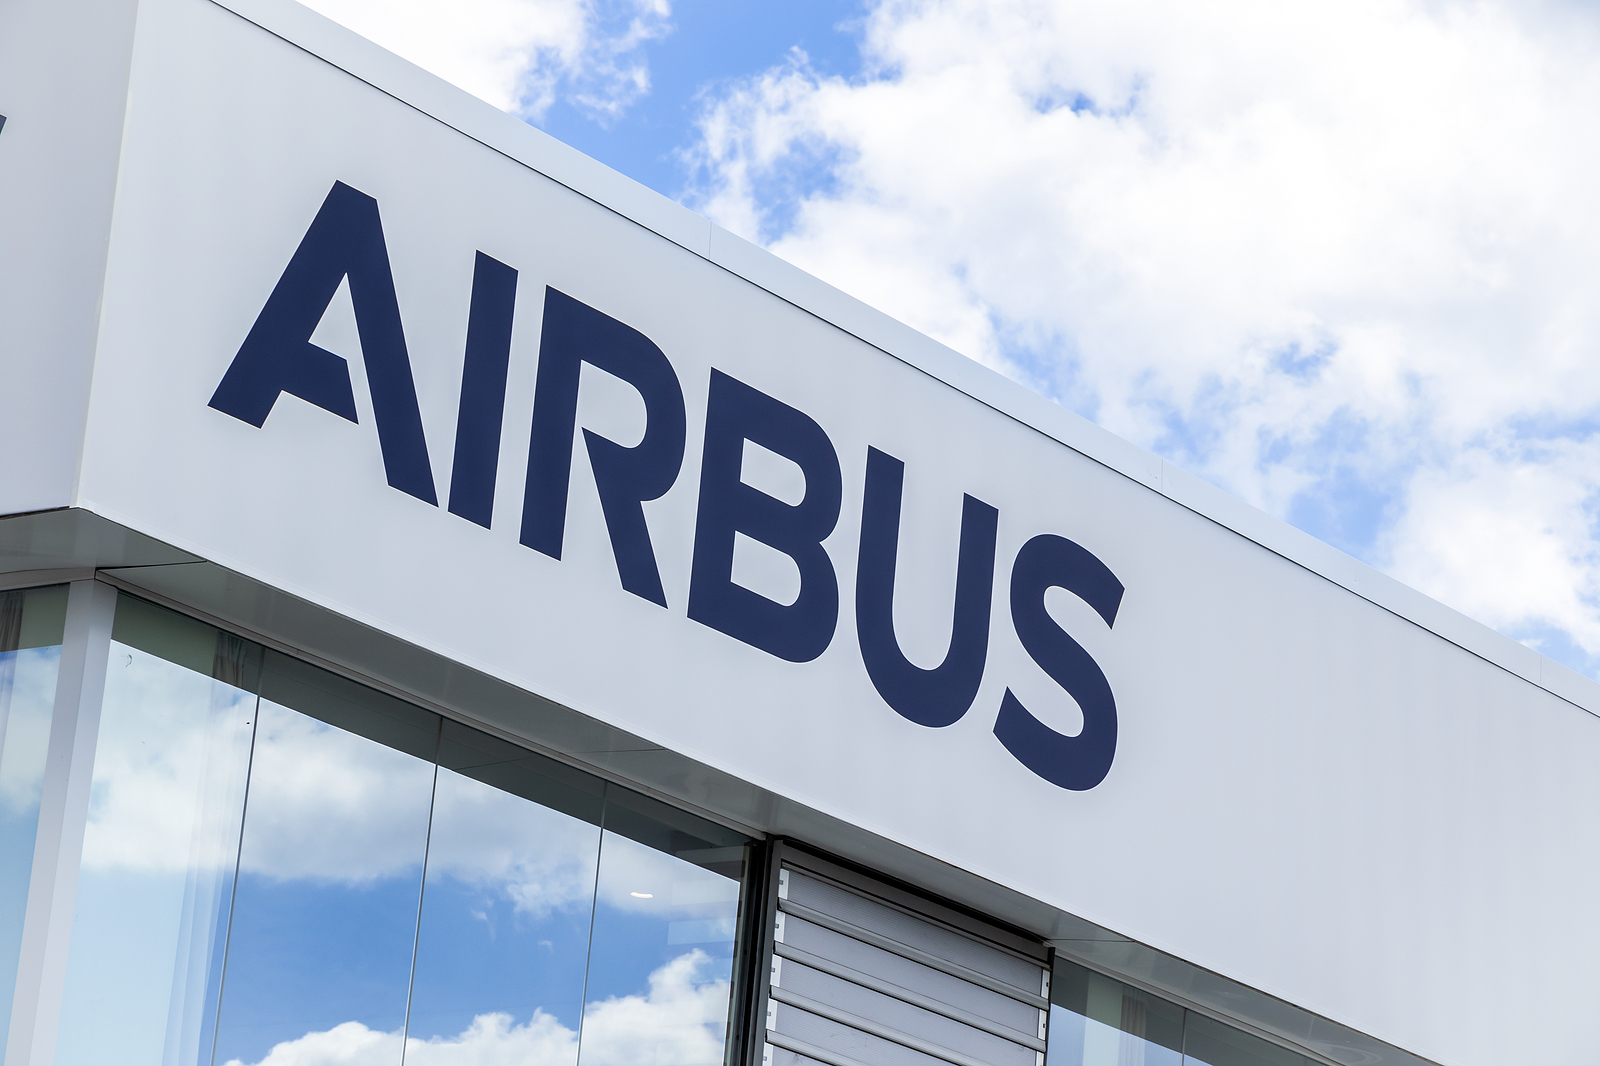 Airbus Launches Investigation After Hacker Leaks Data – Source: www.securityweek.com